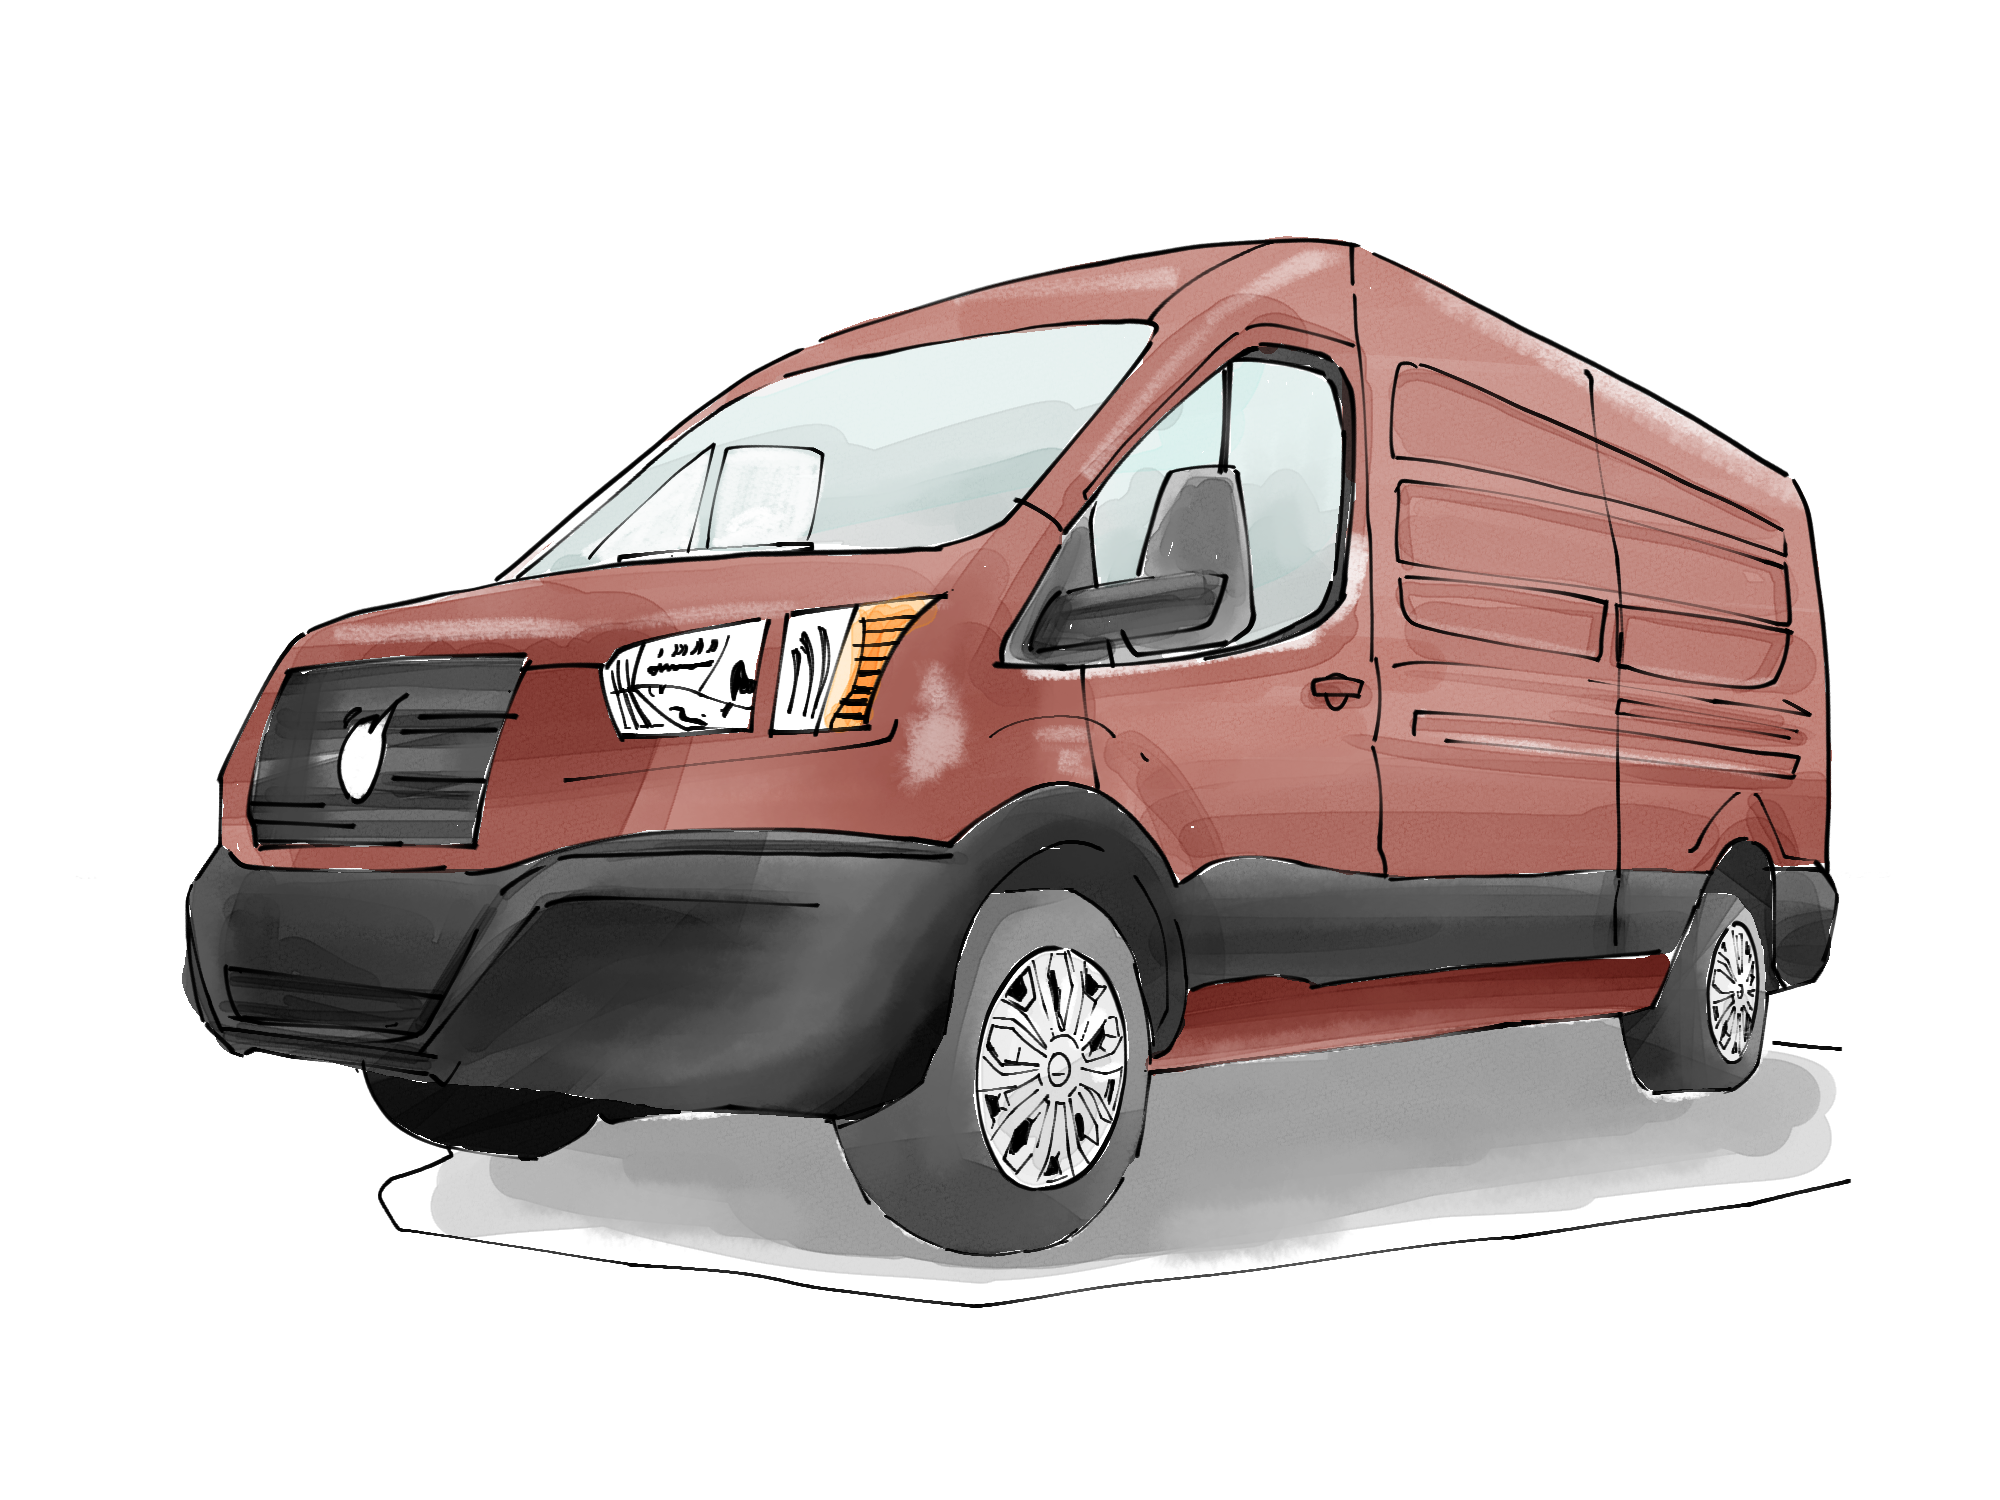  Product image 1 of the product “OX3 Minibus ”